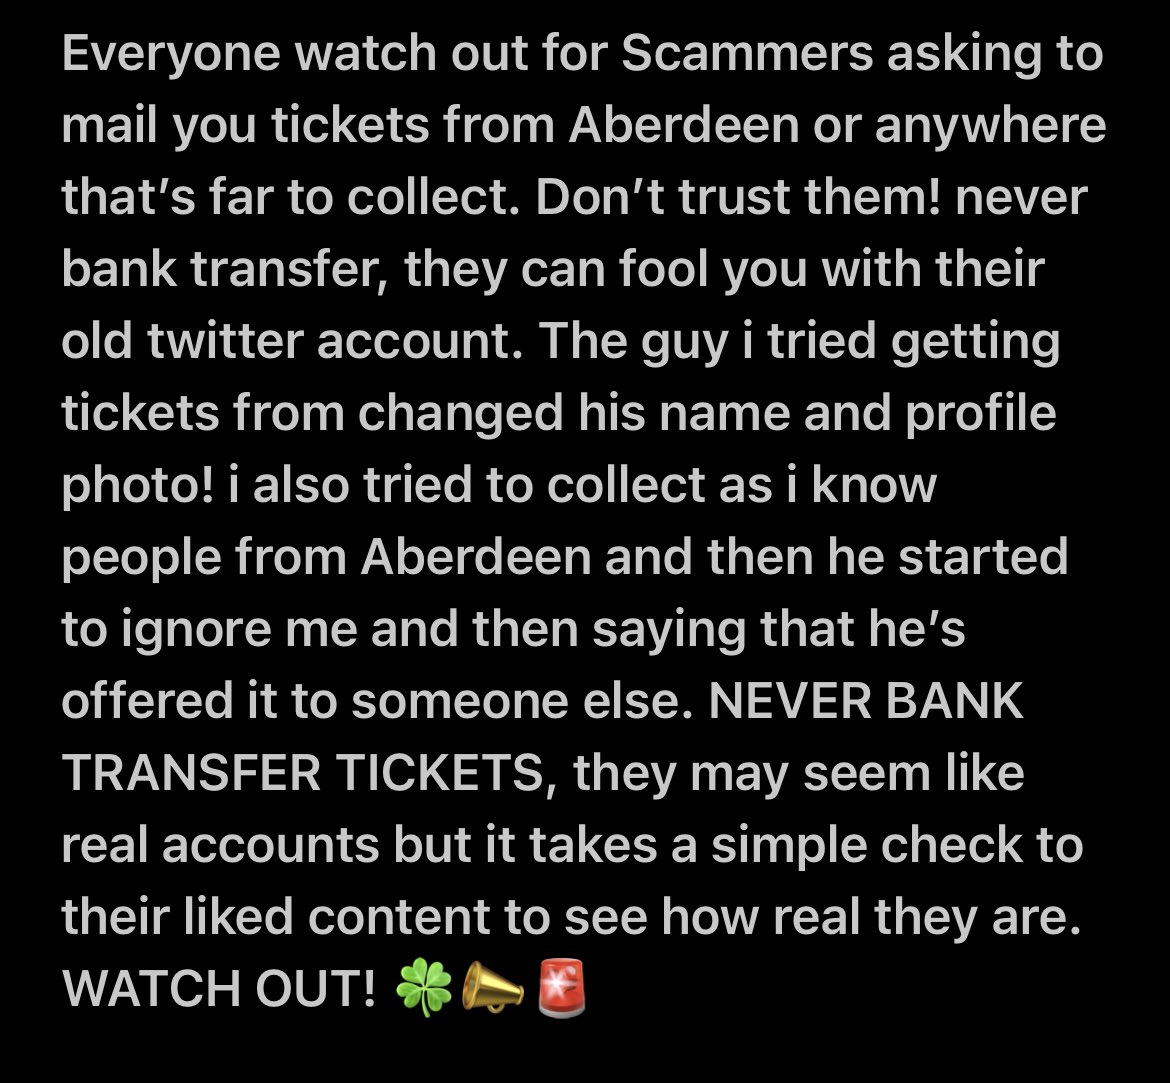 🚨 SCAMMERS 🚨
(I wasn’t scammed but i’m sure people could easily be) 
Read the image below 👇 
@SparesCeltic @HoopsSpares111